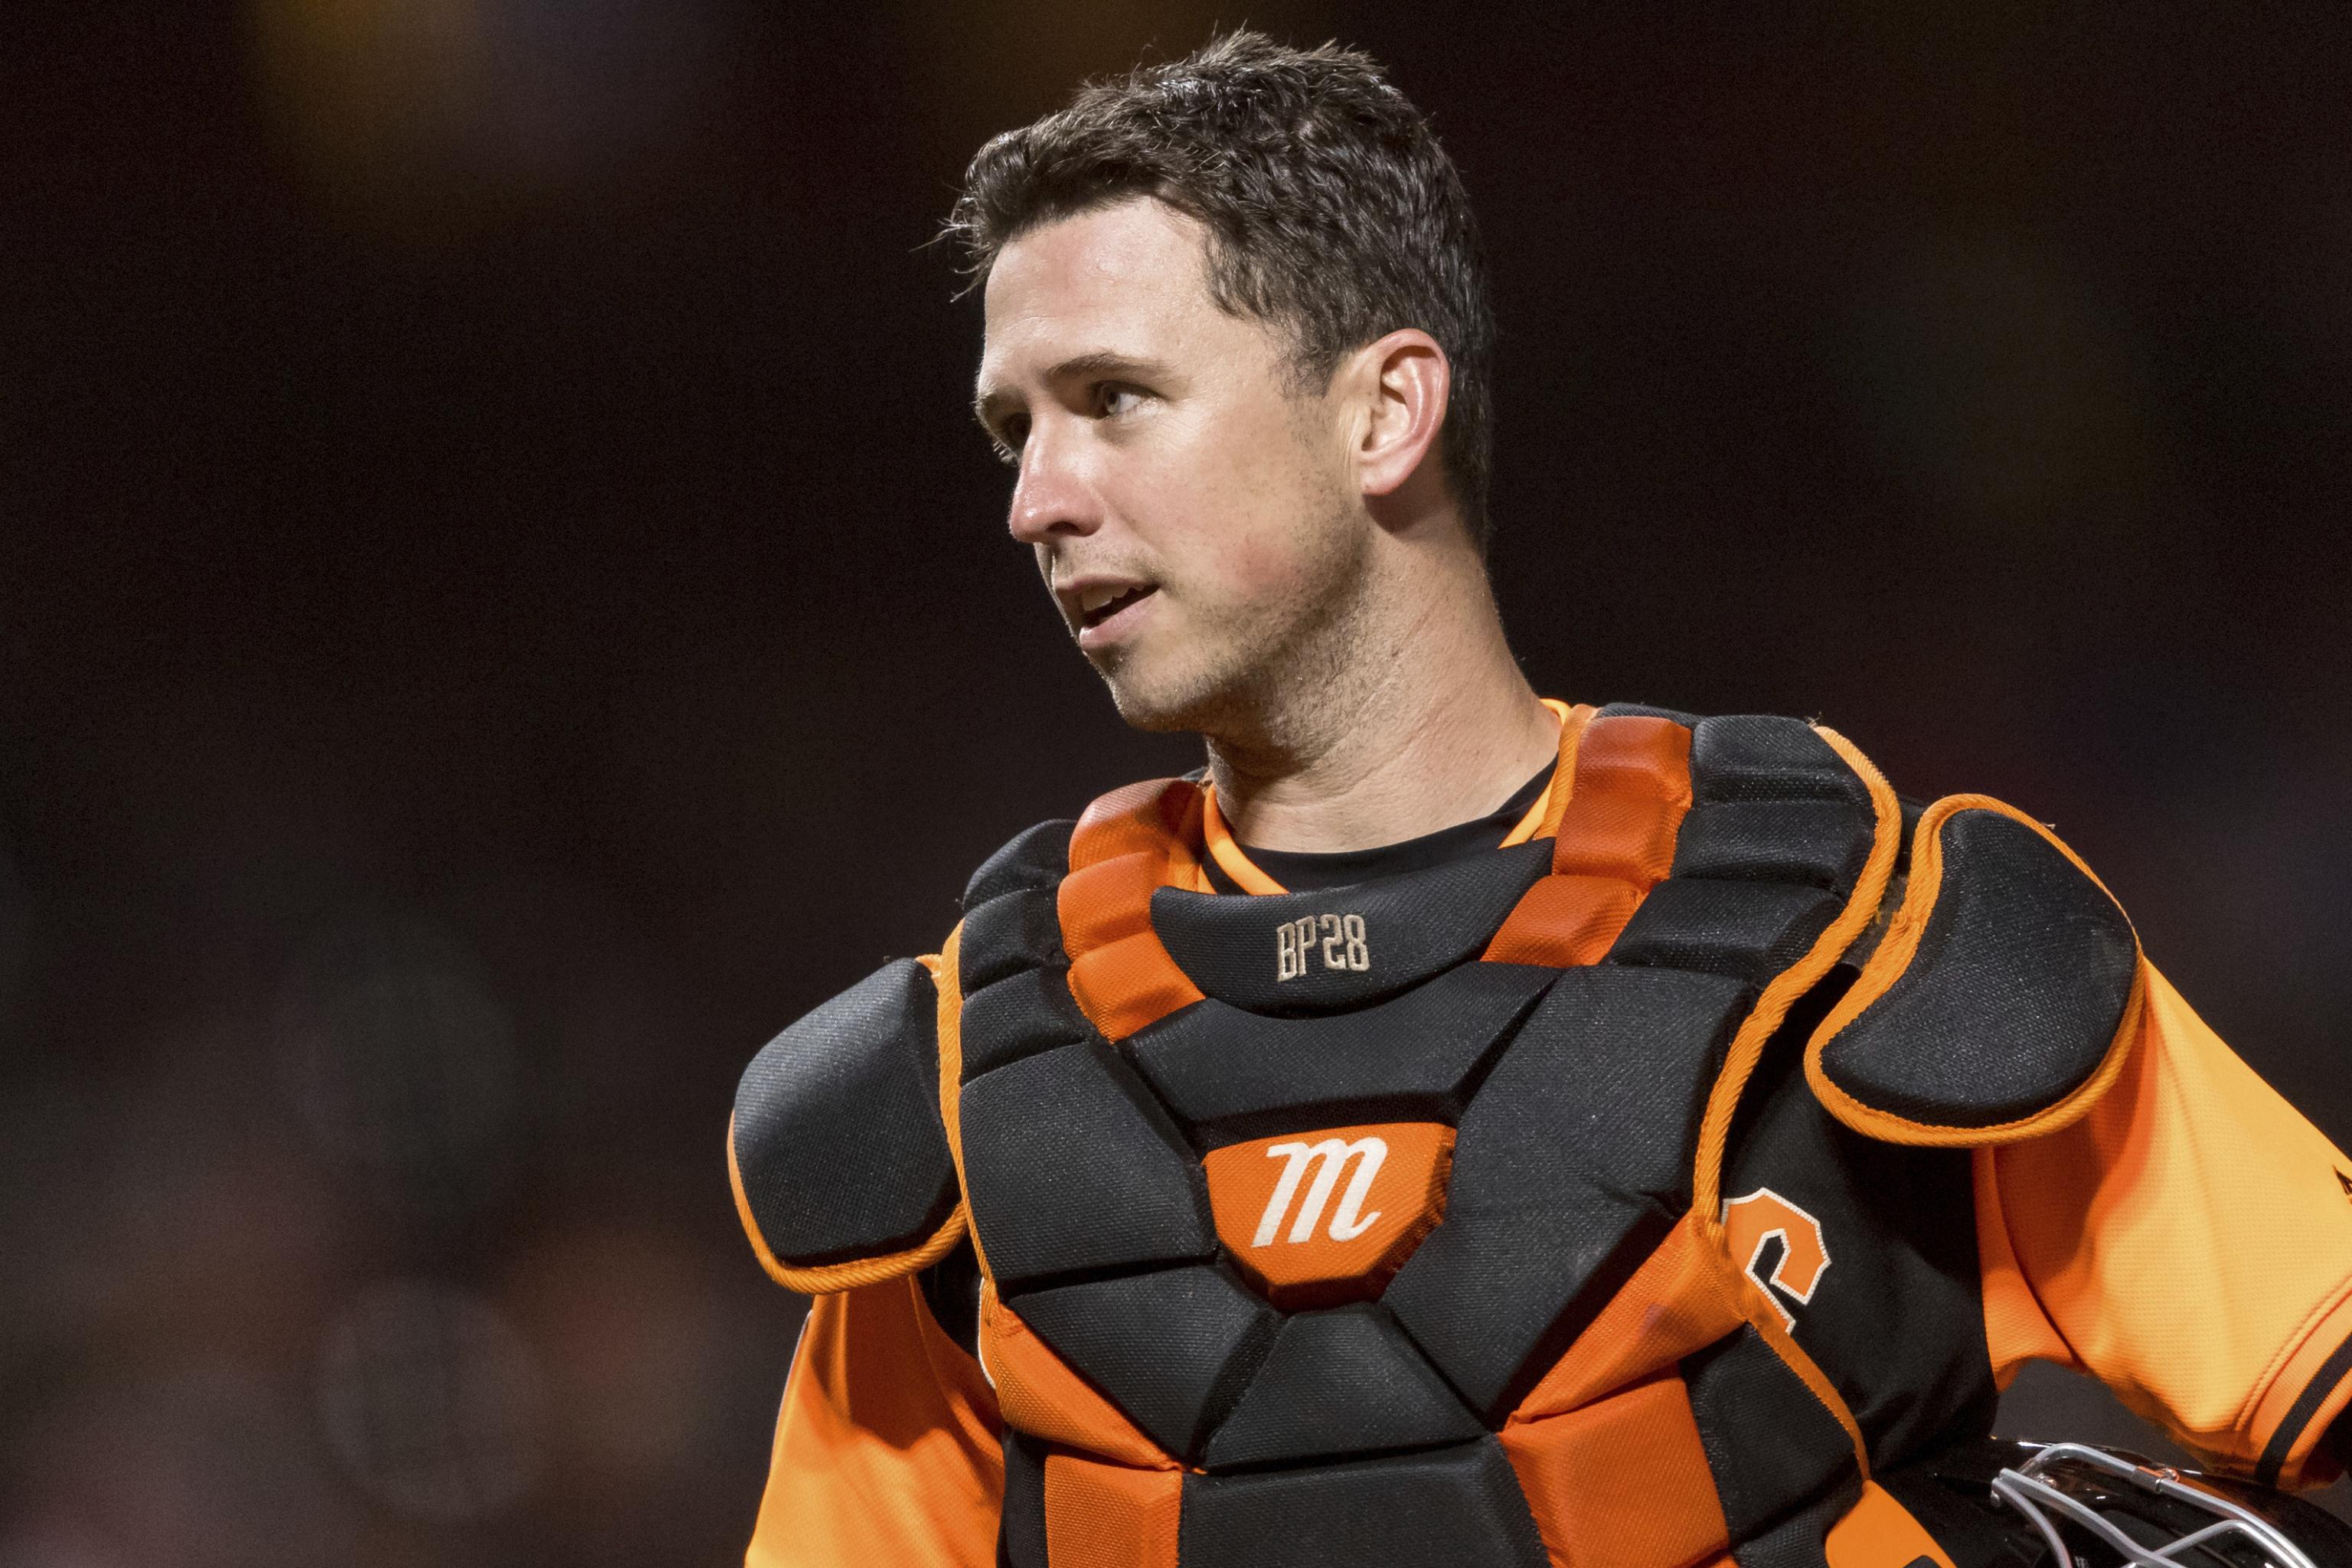 San Francisco Giants catcher Buster Posey put on IL, out for All